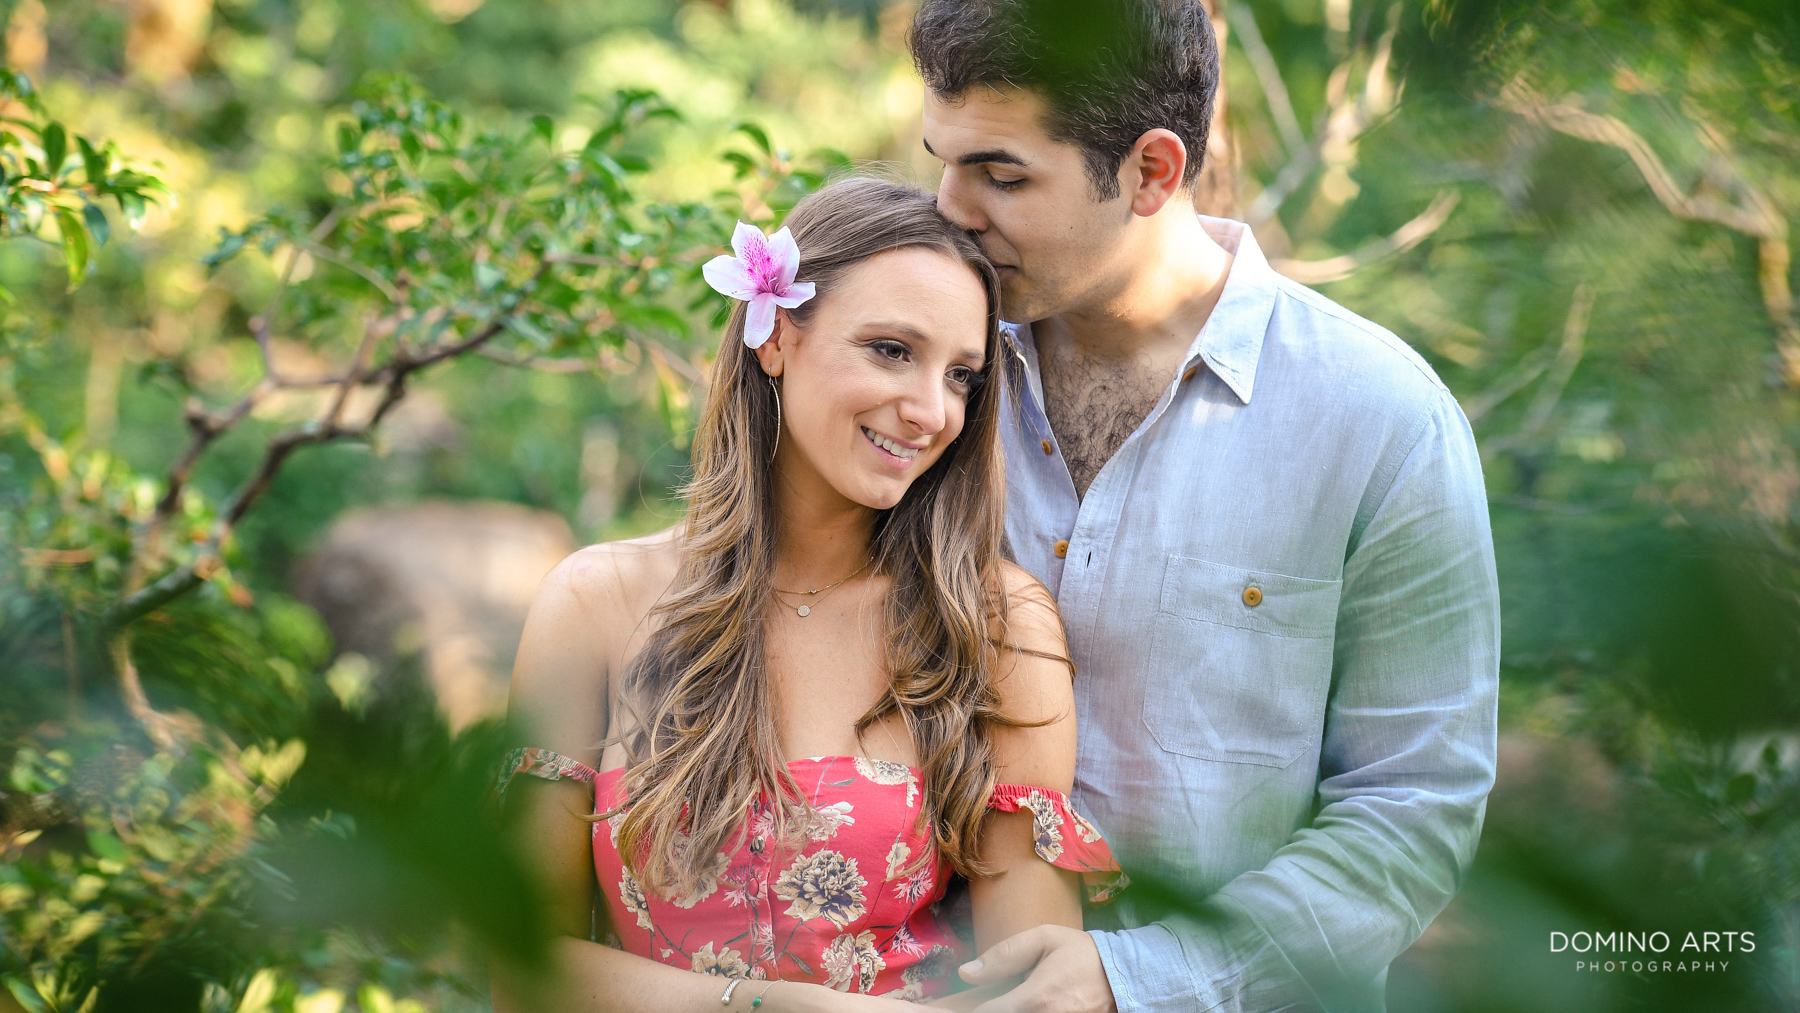 Sweet Nature lover engagement pictures at Morikami